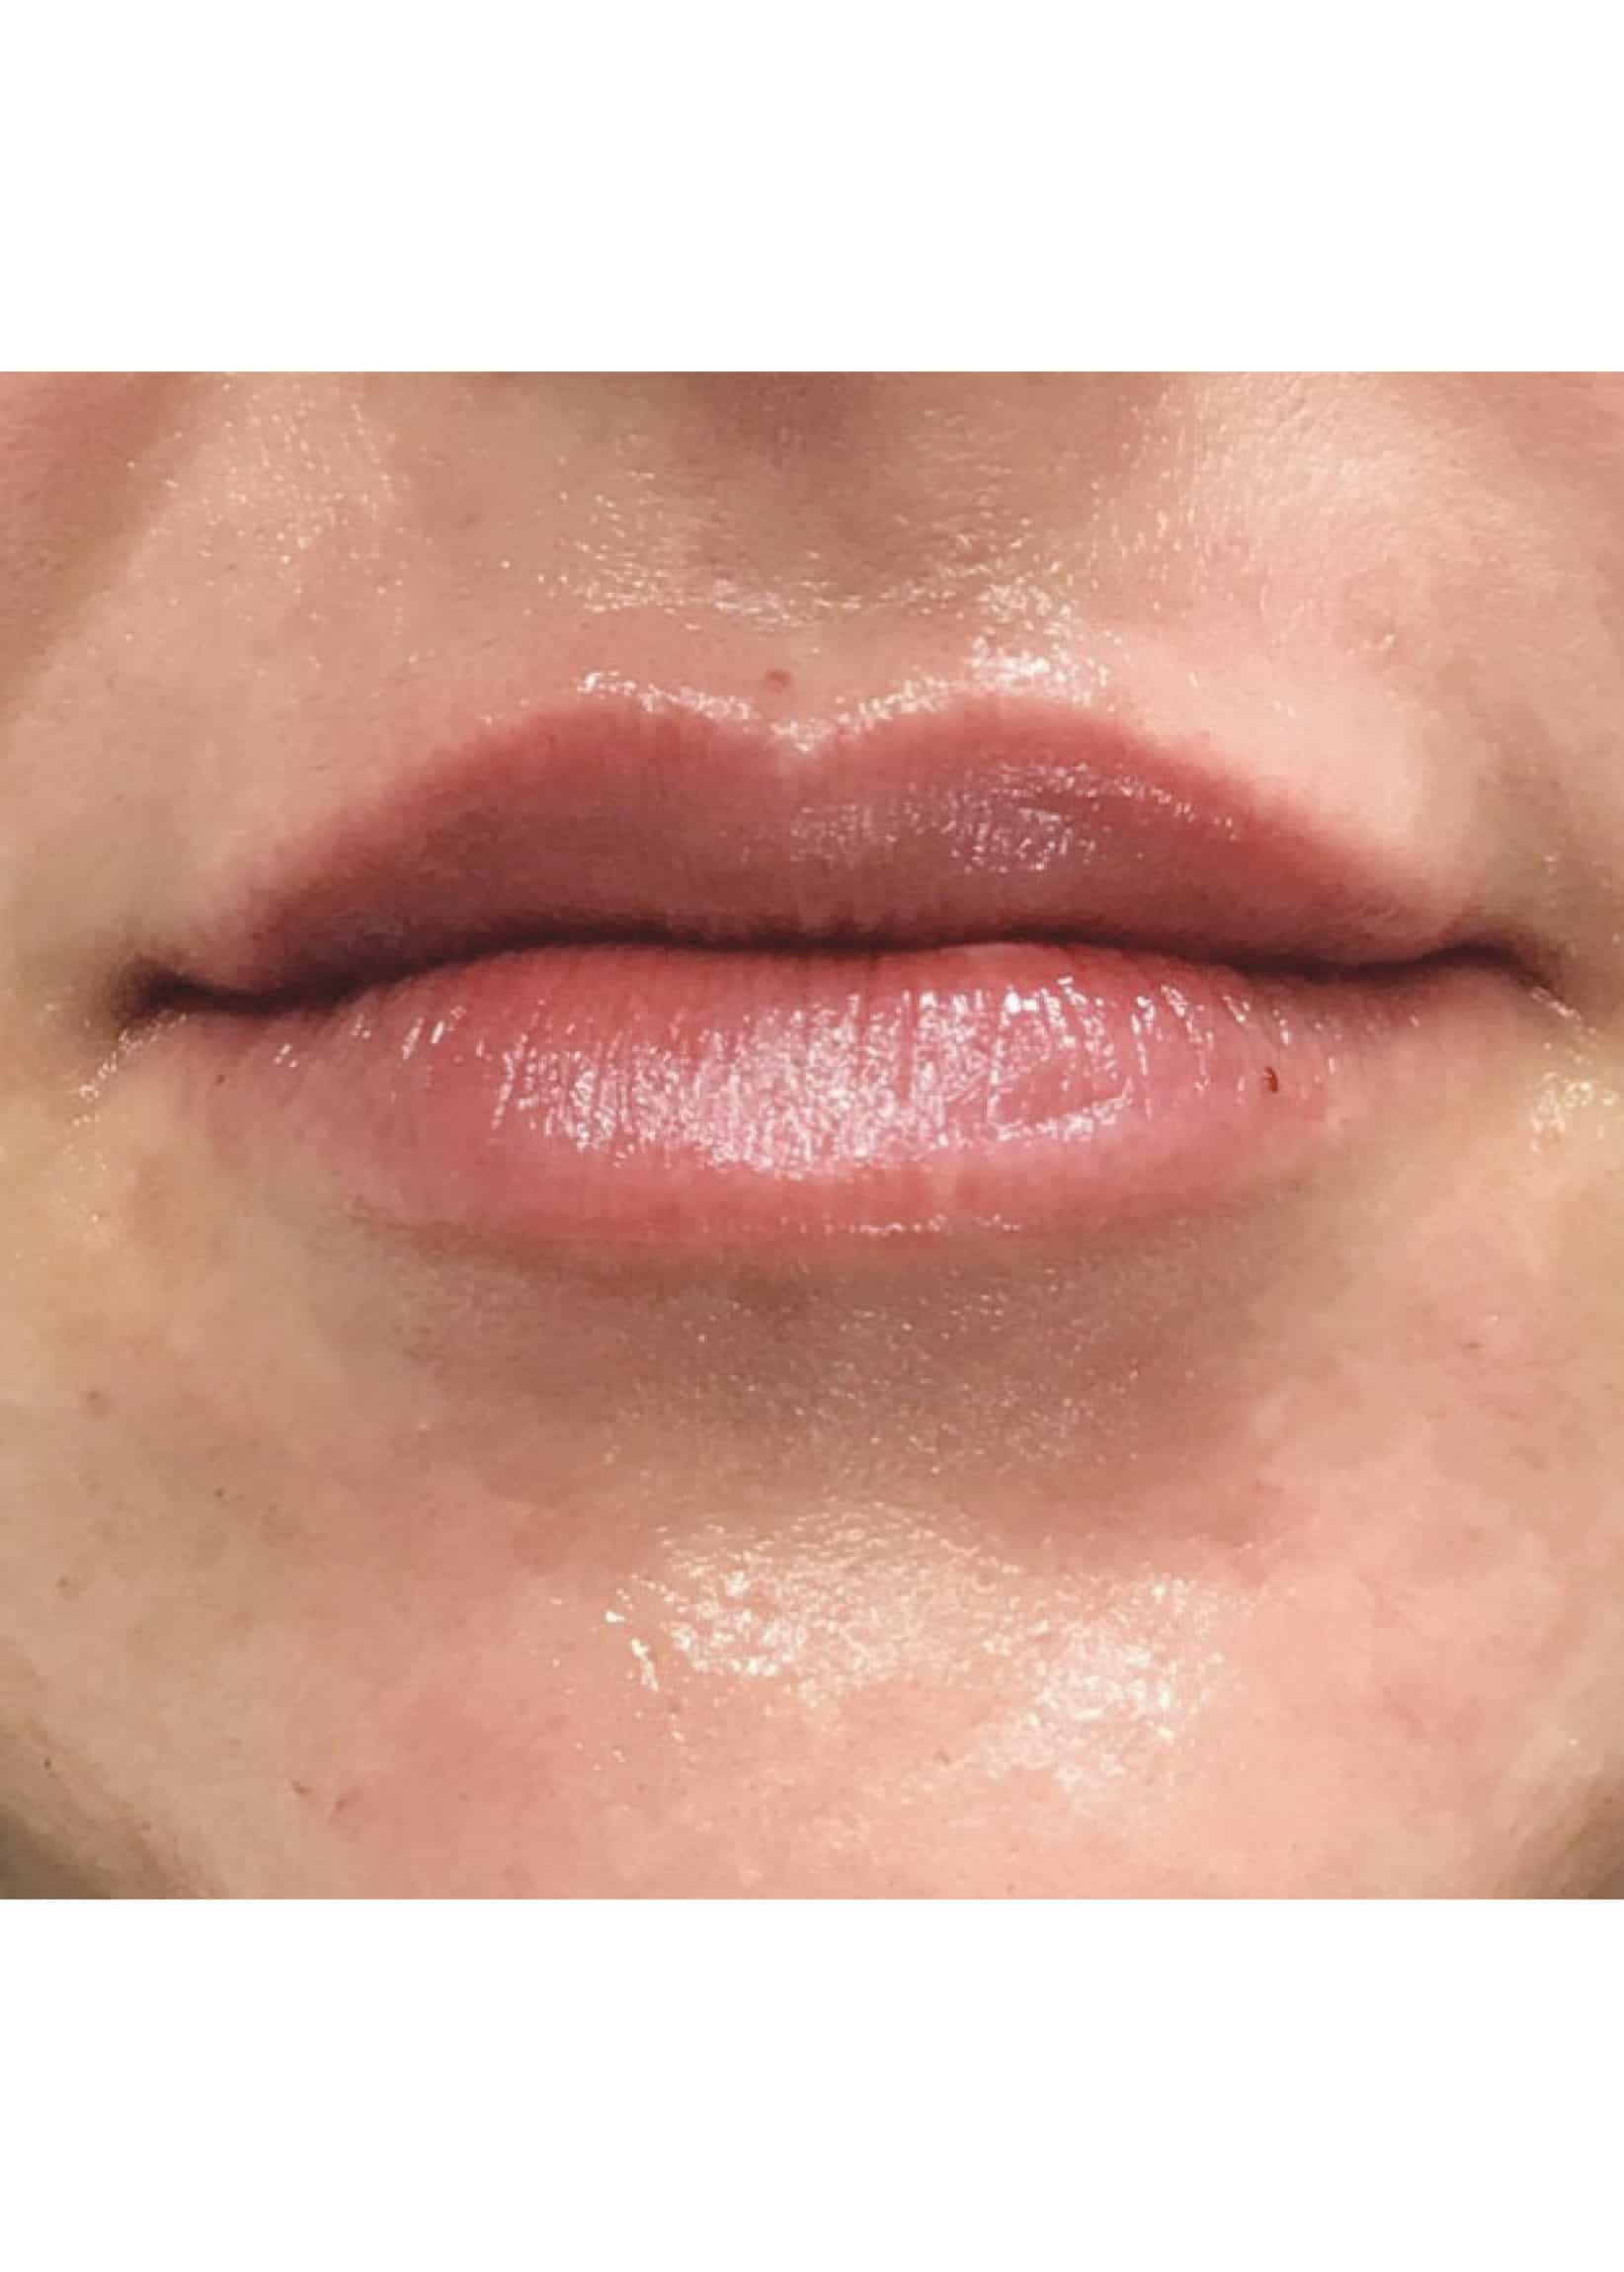 TheSkinCenter ProviderPages JonnaBlum LipFiller After 5 scaled 1